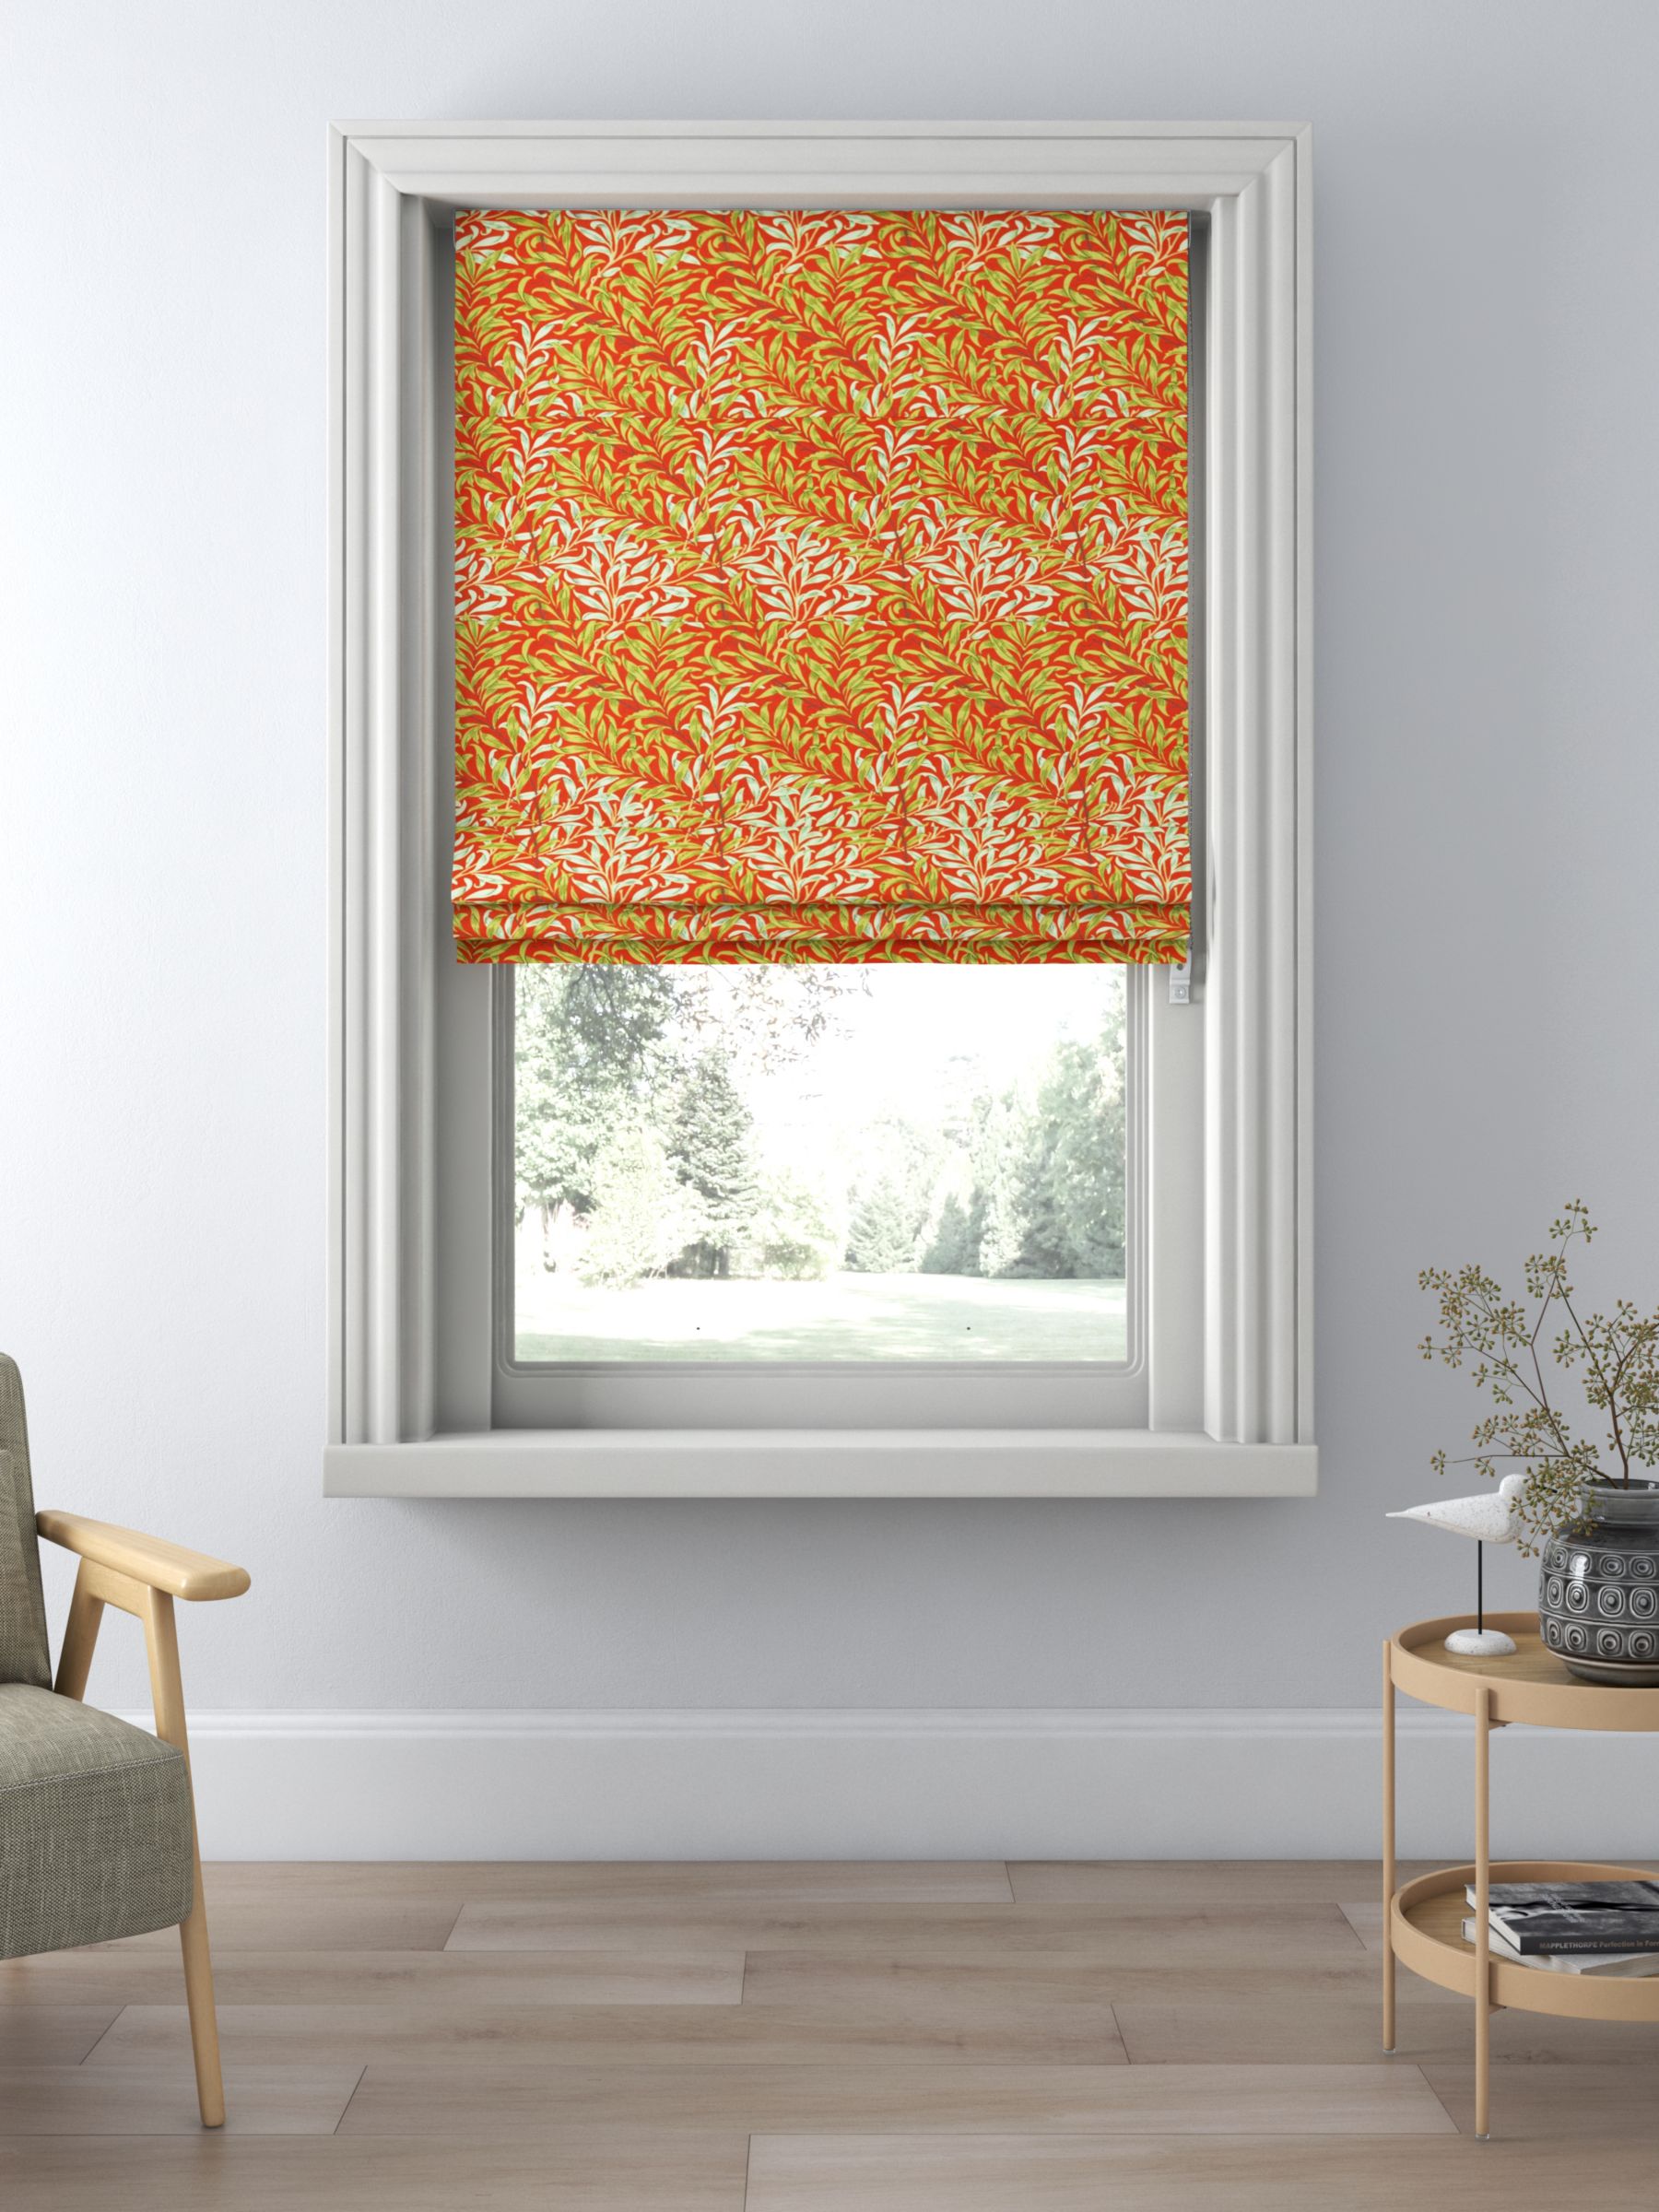 W&P Blinds, Made to measure blinds and curtains in Cambridge, Since 1974